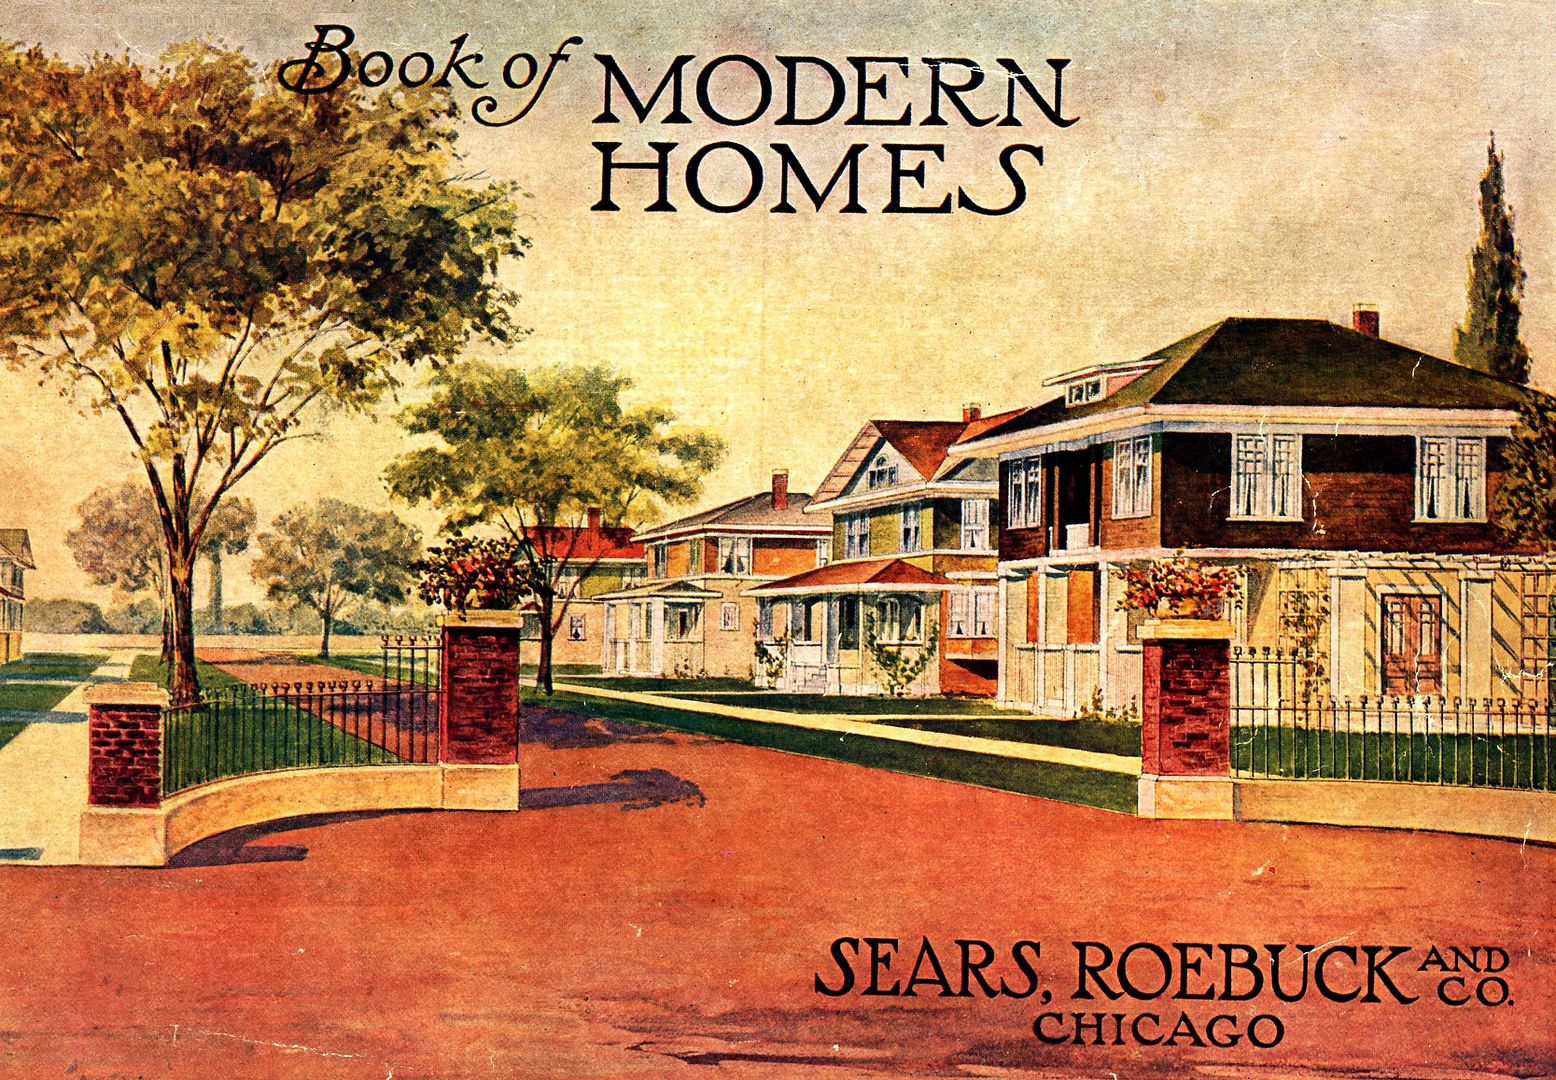 Sears Modern Home #303 appeared only one year - in the 1910 Sears Modern Homes catalog. 